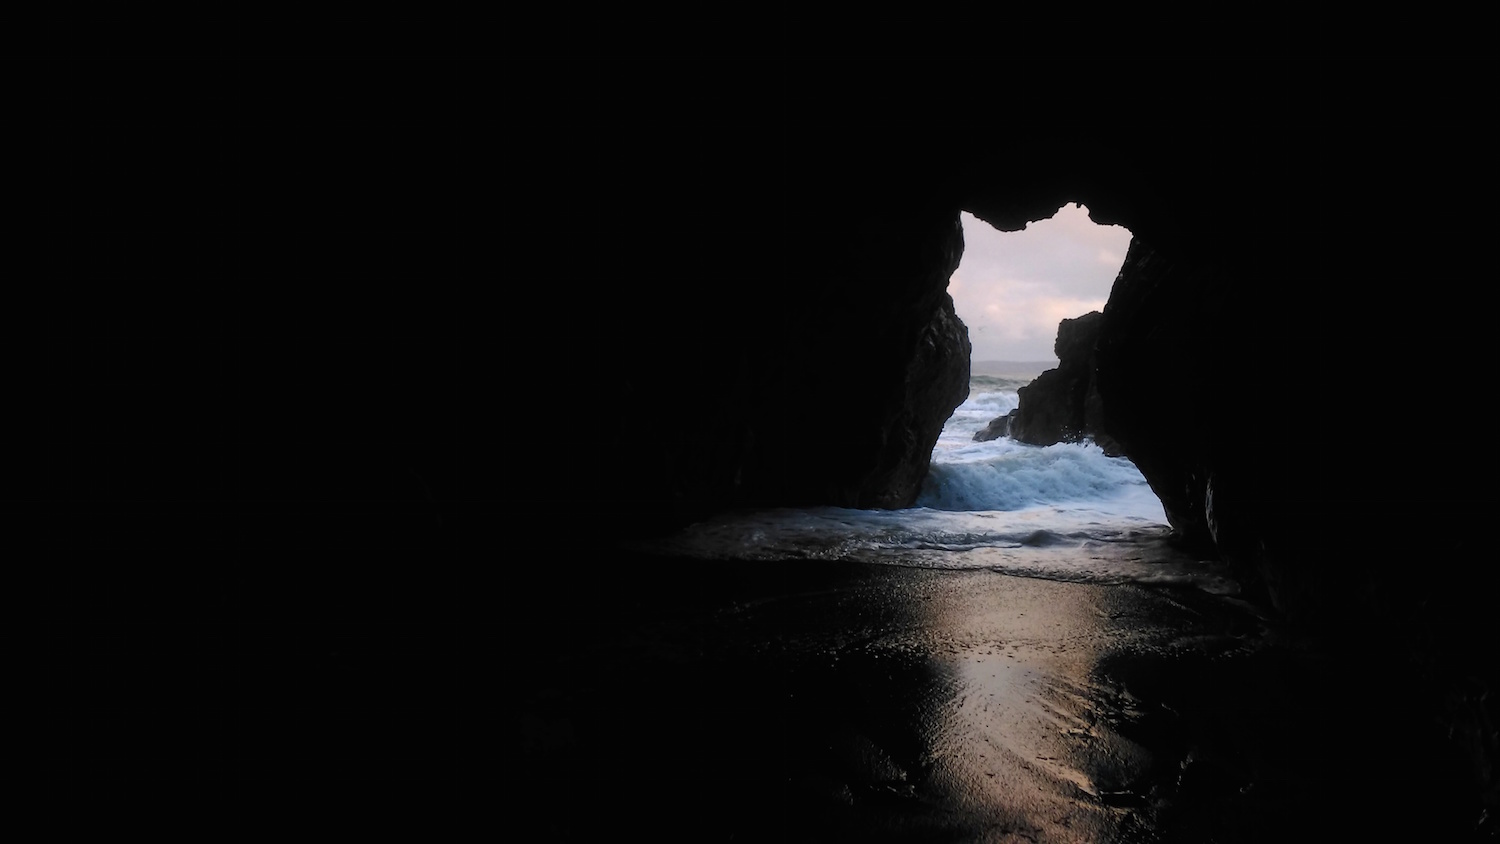 Entirely hollow aside from the dark, Photo by AlanJames Burns, Smugglers Cave, Portrane, Co Dublin